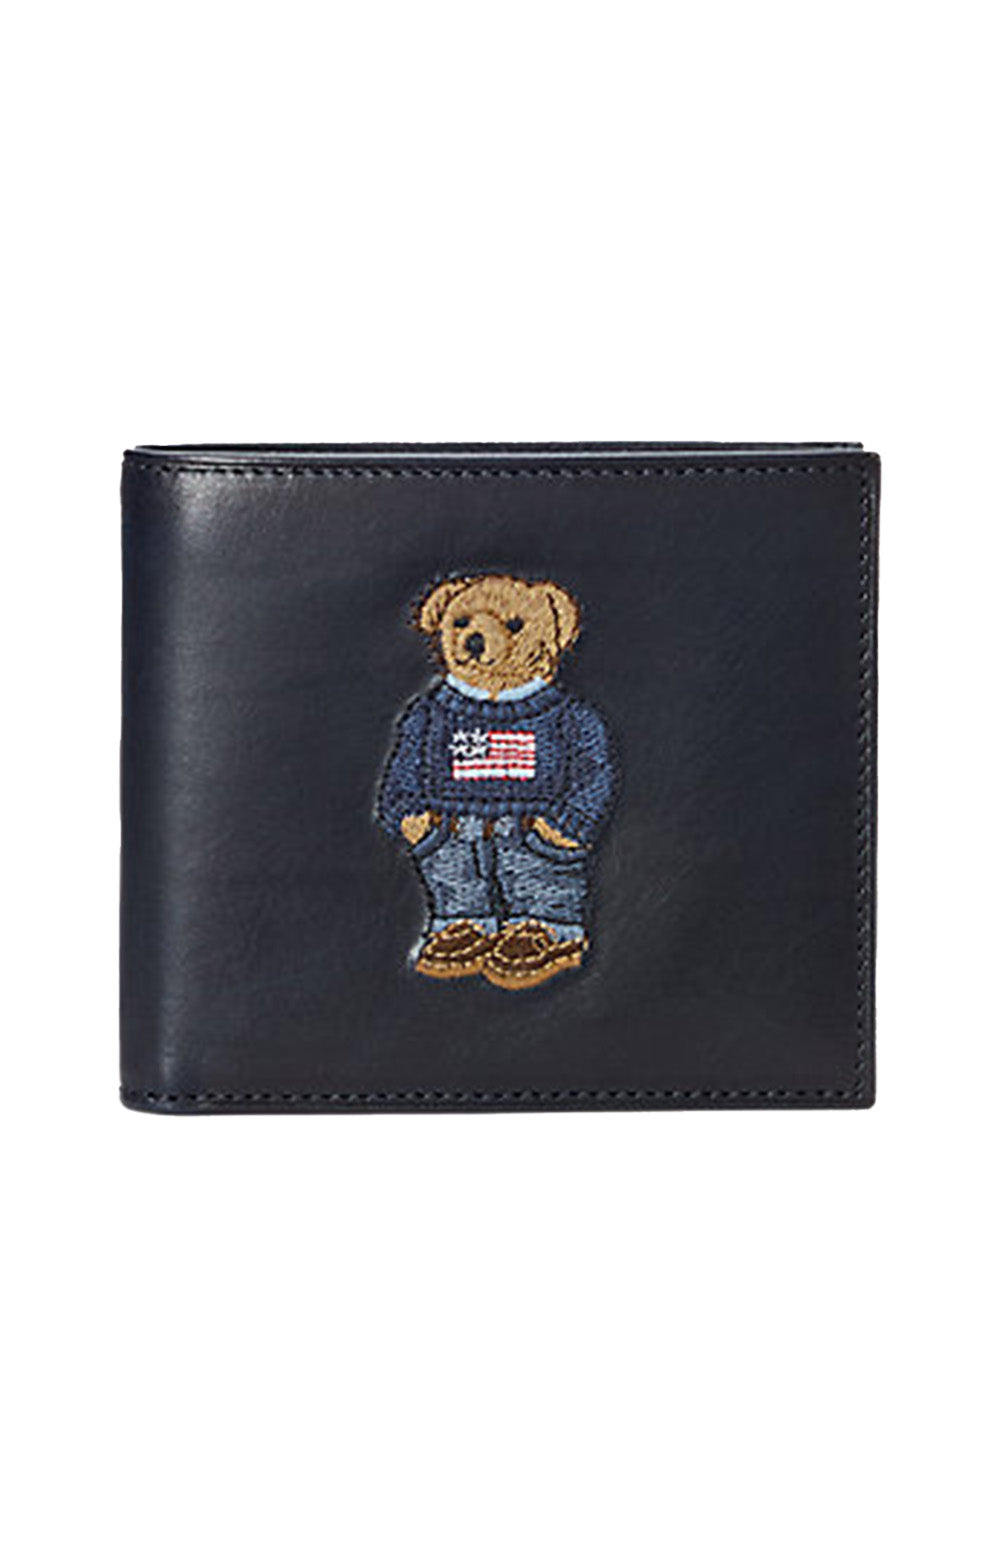 Polo Bear Leather Billfold Wallet - Navy/American Flag Sweater